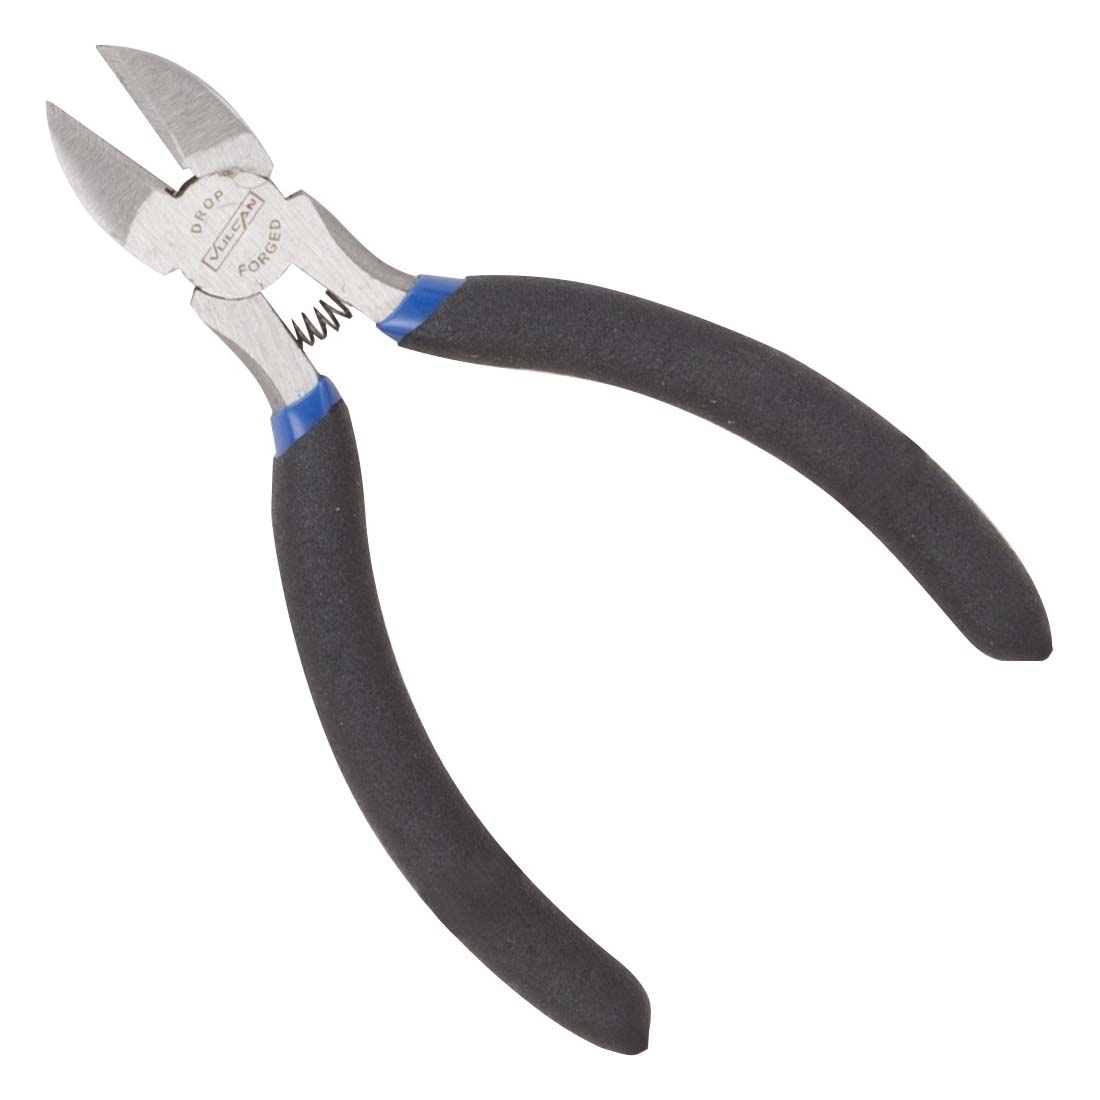 JL-NP018 Diagonal Cutting Plier, 4.5 in OAL, 0.4 mm Cutting Capacity, 0.25 in Jaw Opening, Black/Blue Handle